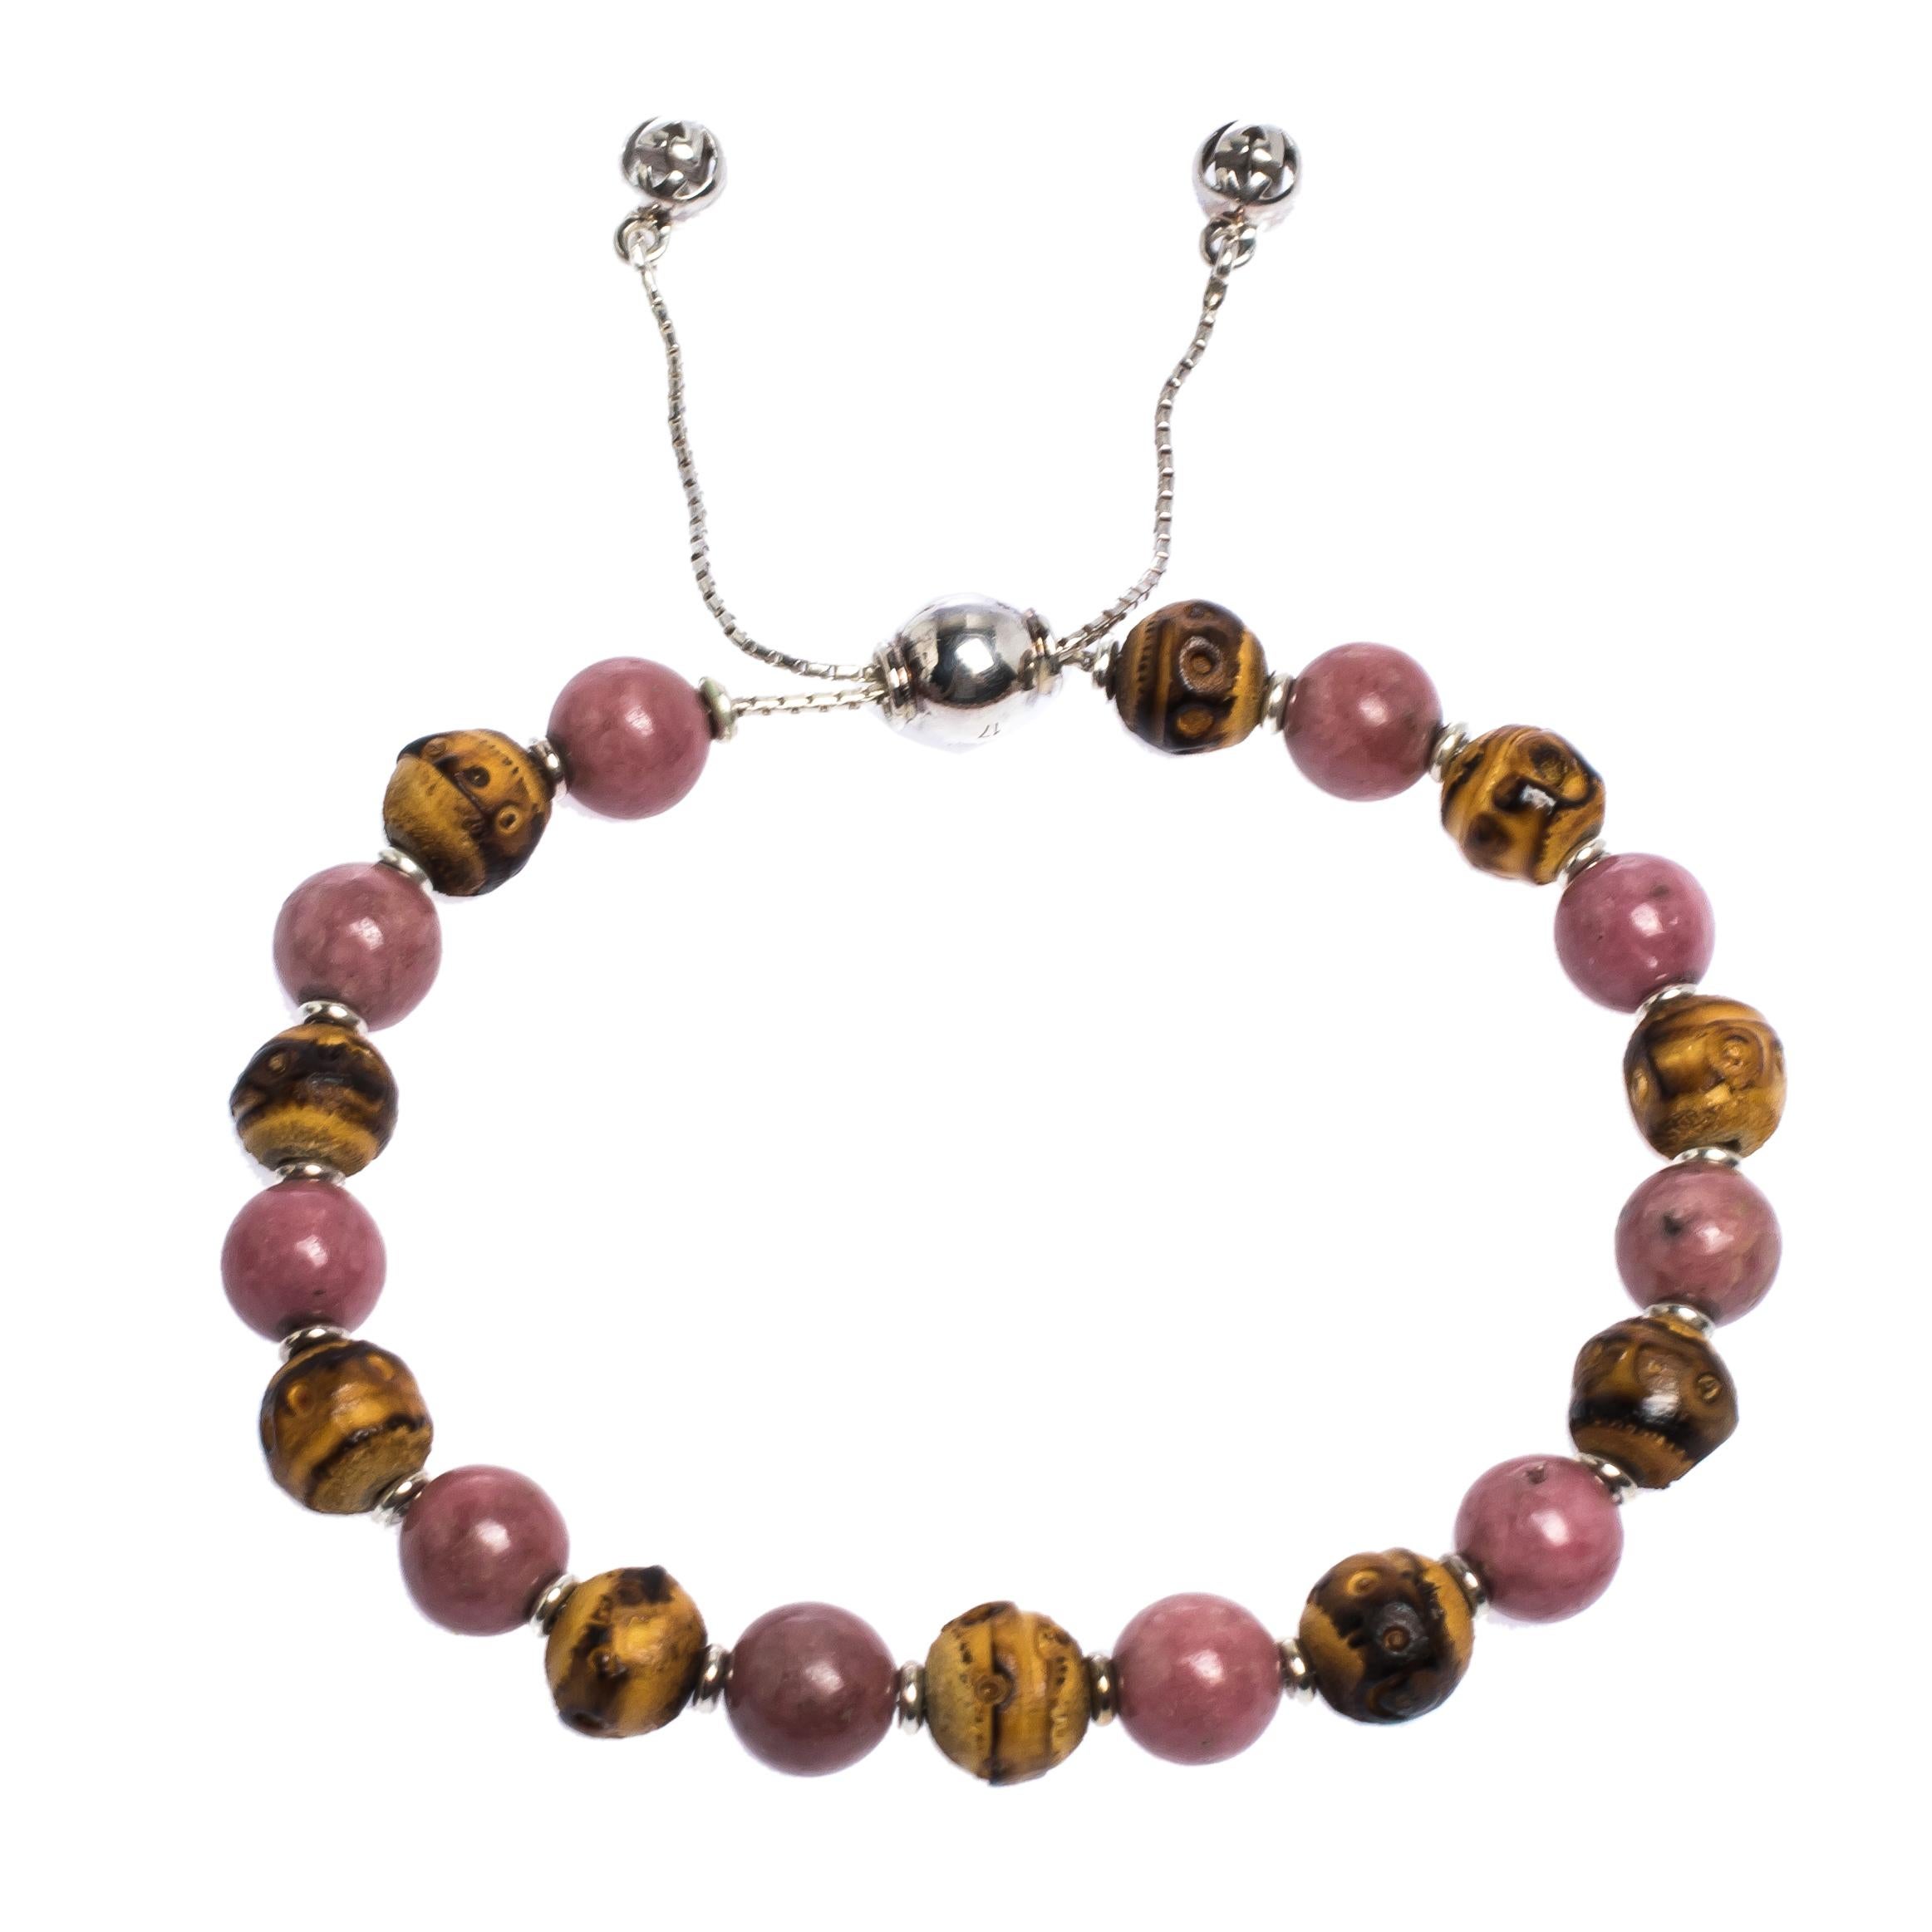 Simplicity and fashion combine to form this exquisite Gucci bracelet just for you. Made from silver, the bracelet features a string of stone and wood beads and an adjustable closure. Minimal and comfortable to wear, this piece will make a fine